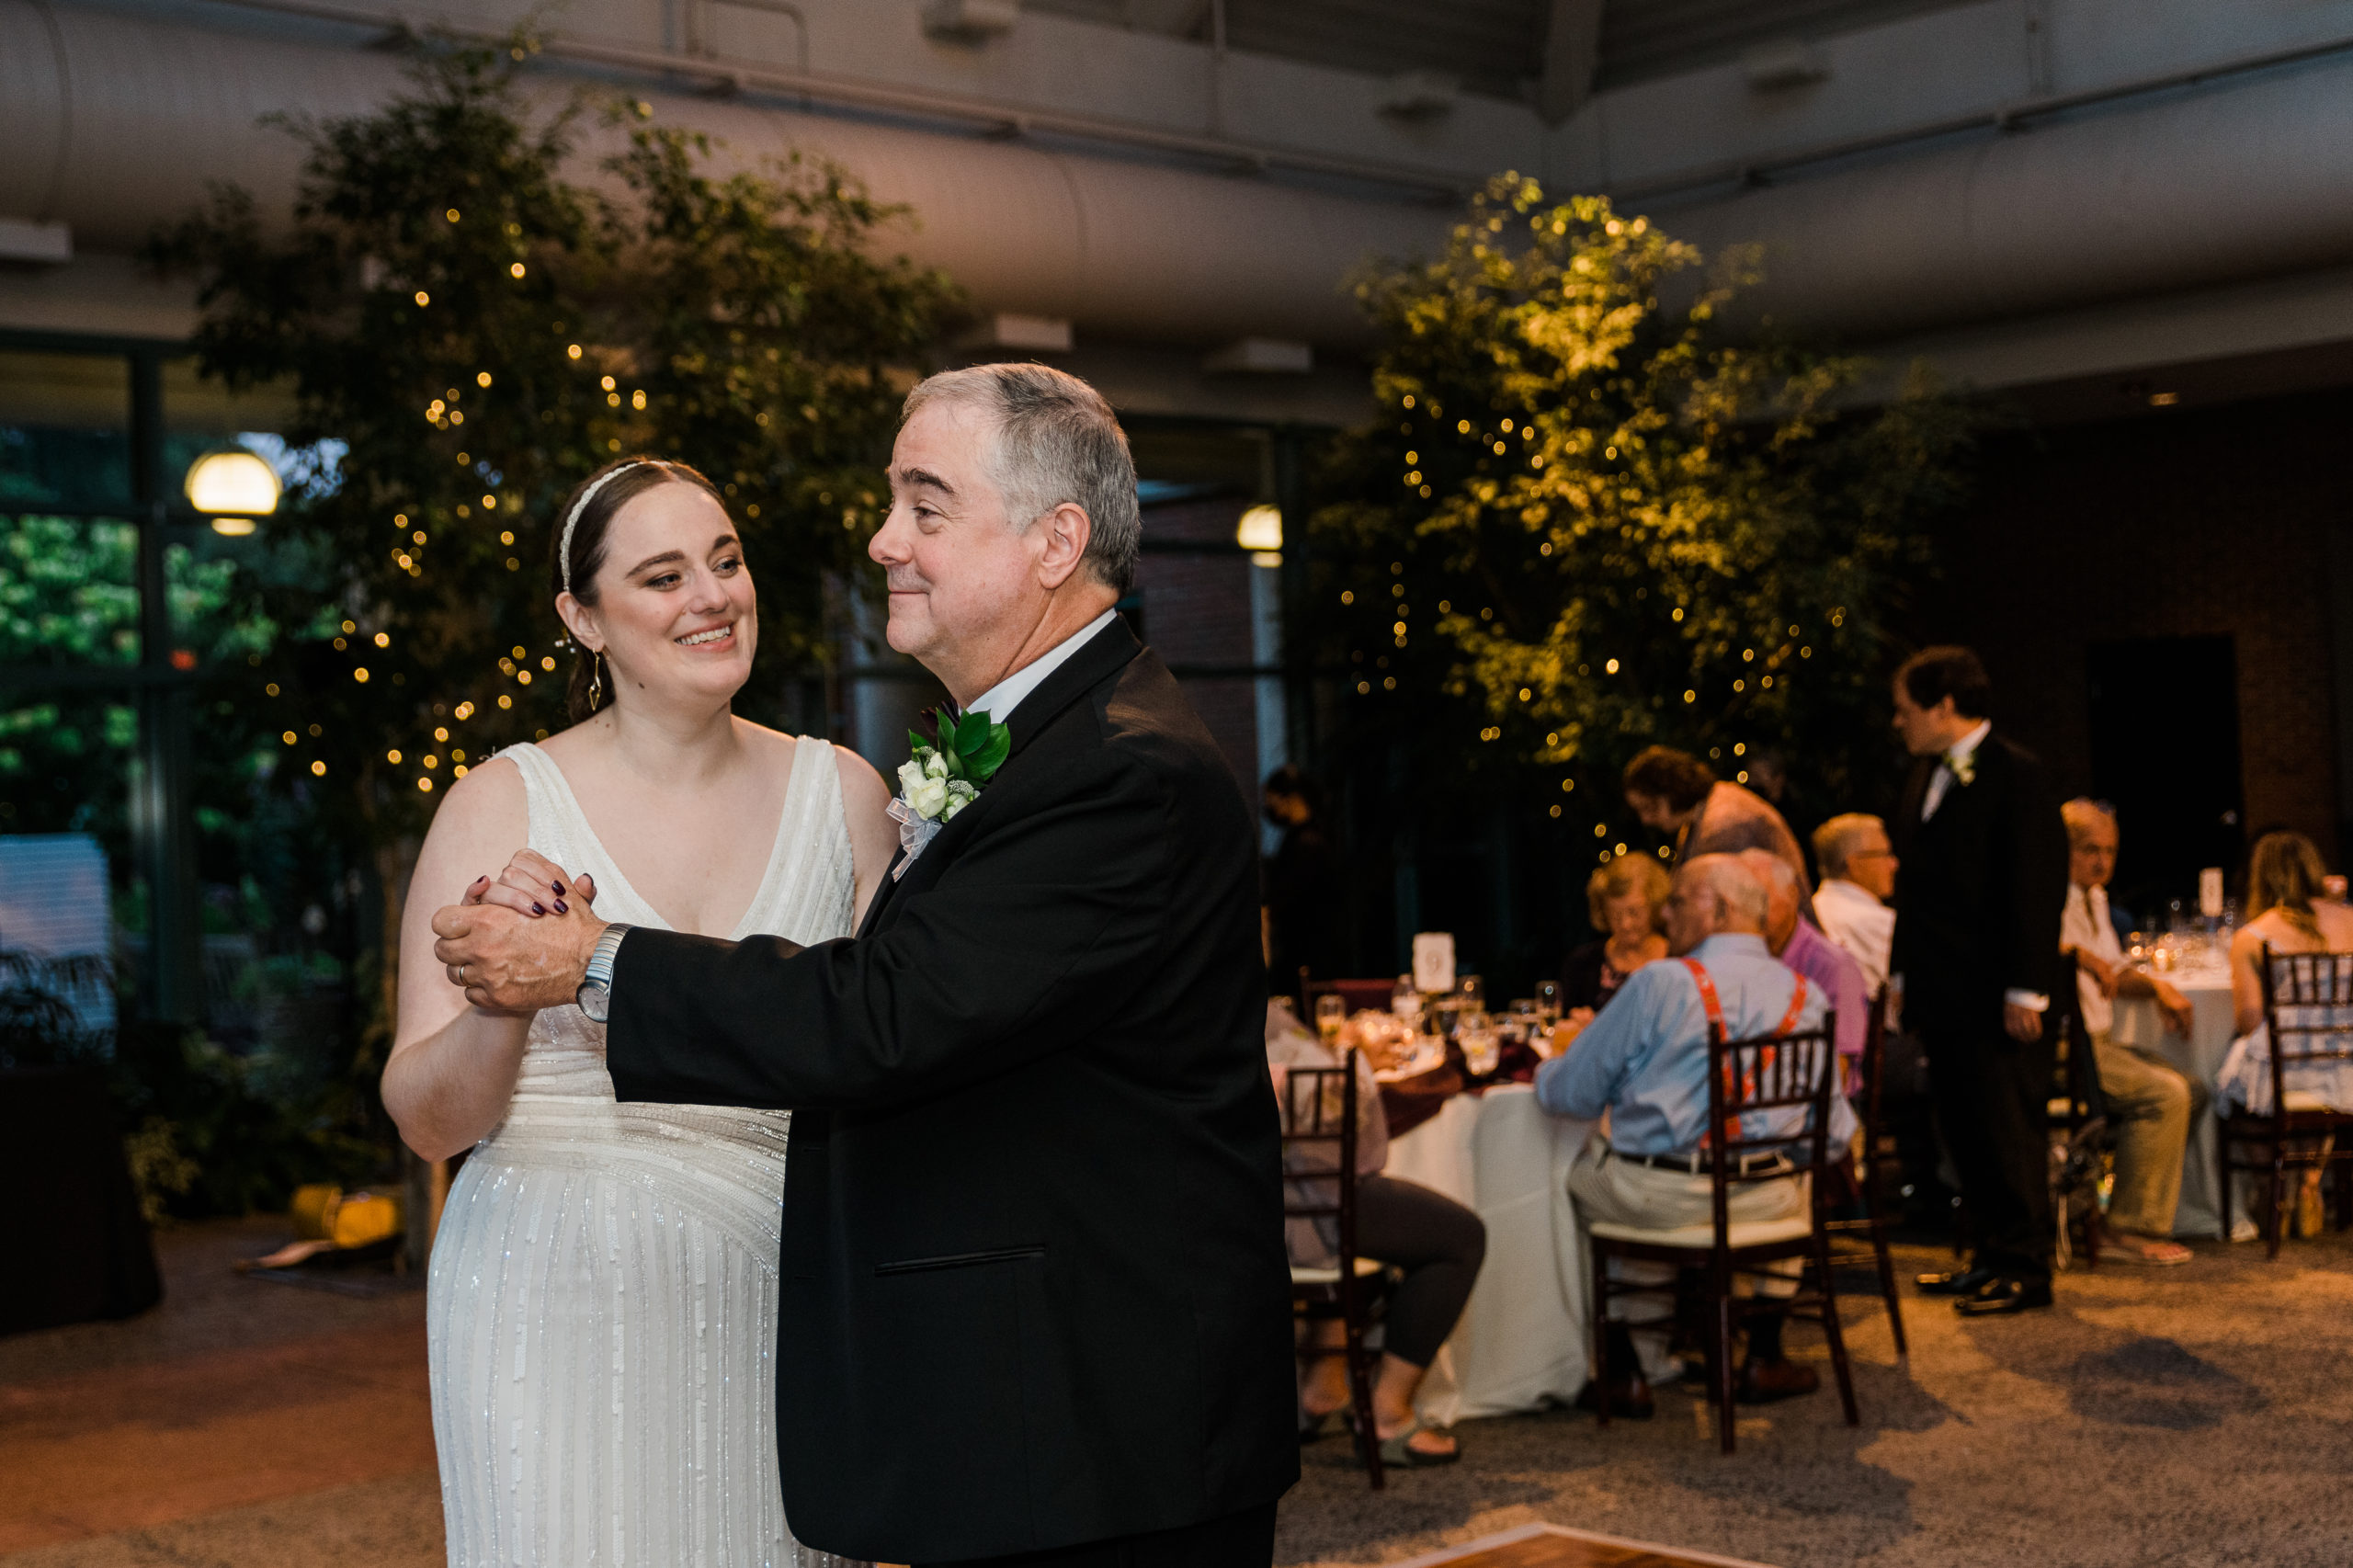 Bride dancing with her father at a wedding reception at the Atrium at Meadowlark Botanical Gardens